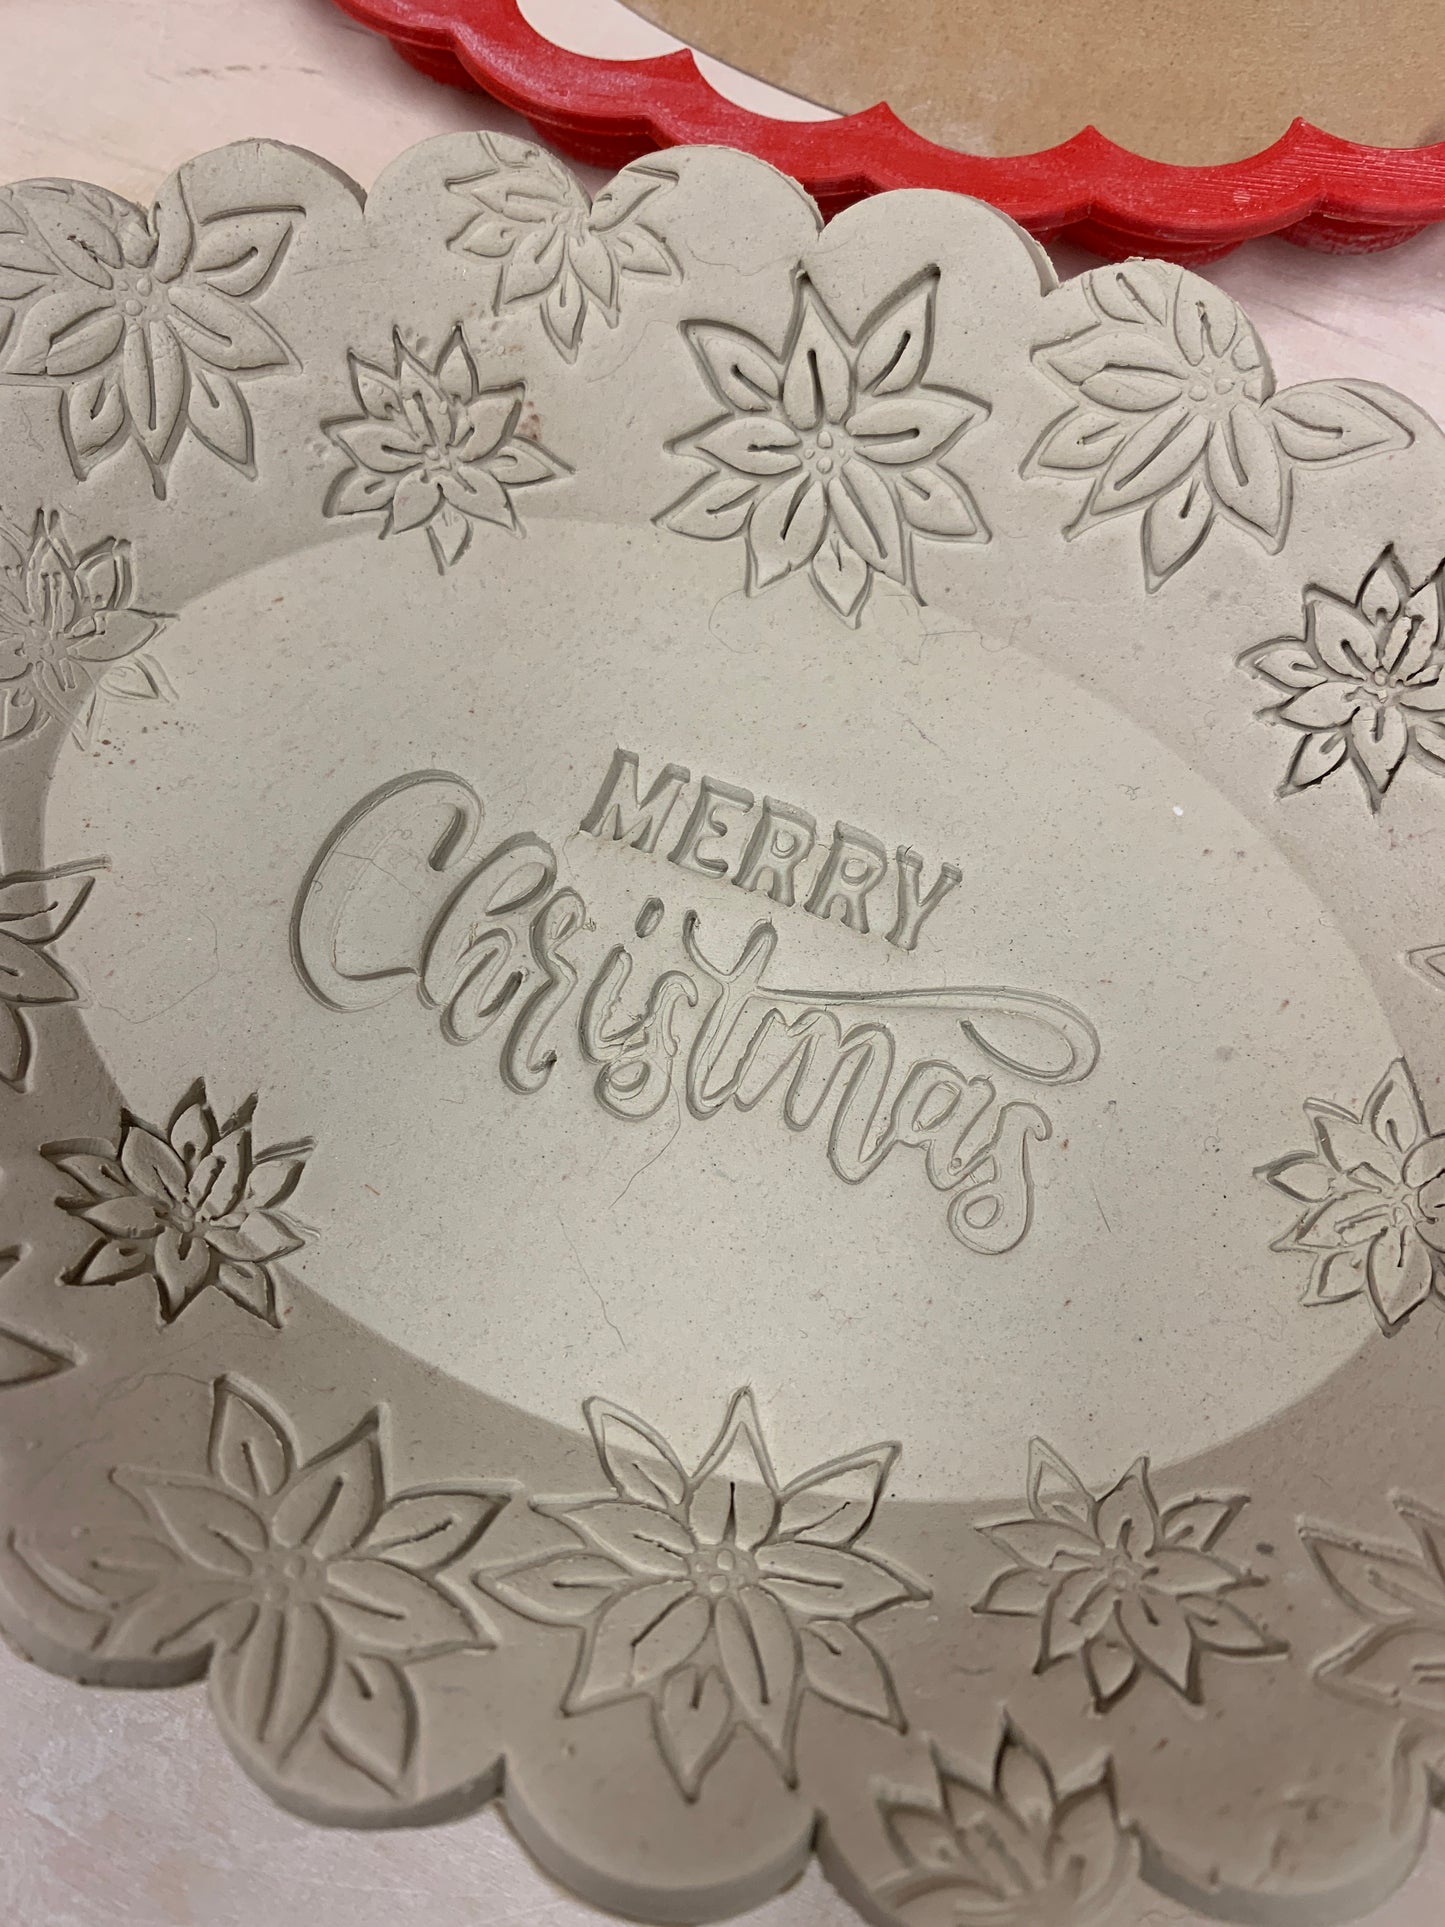 Christmas formal "Merry Christmas" word stamp - plastic 3D printed, multiple sizes